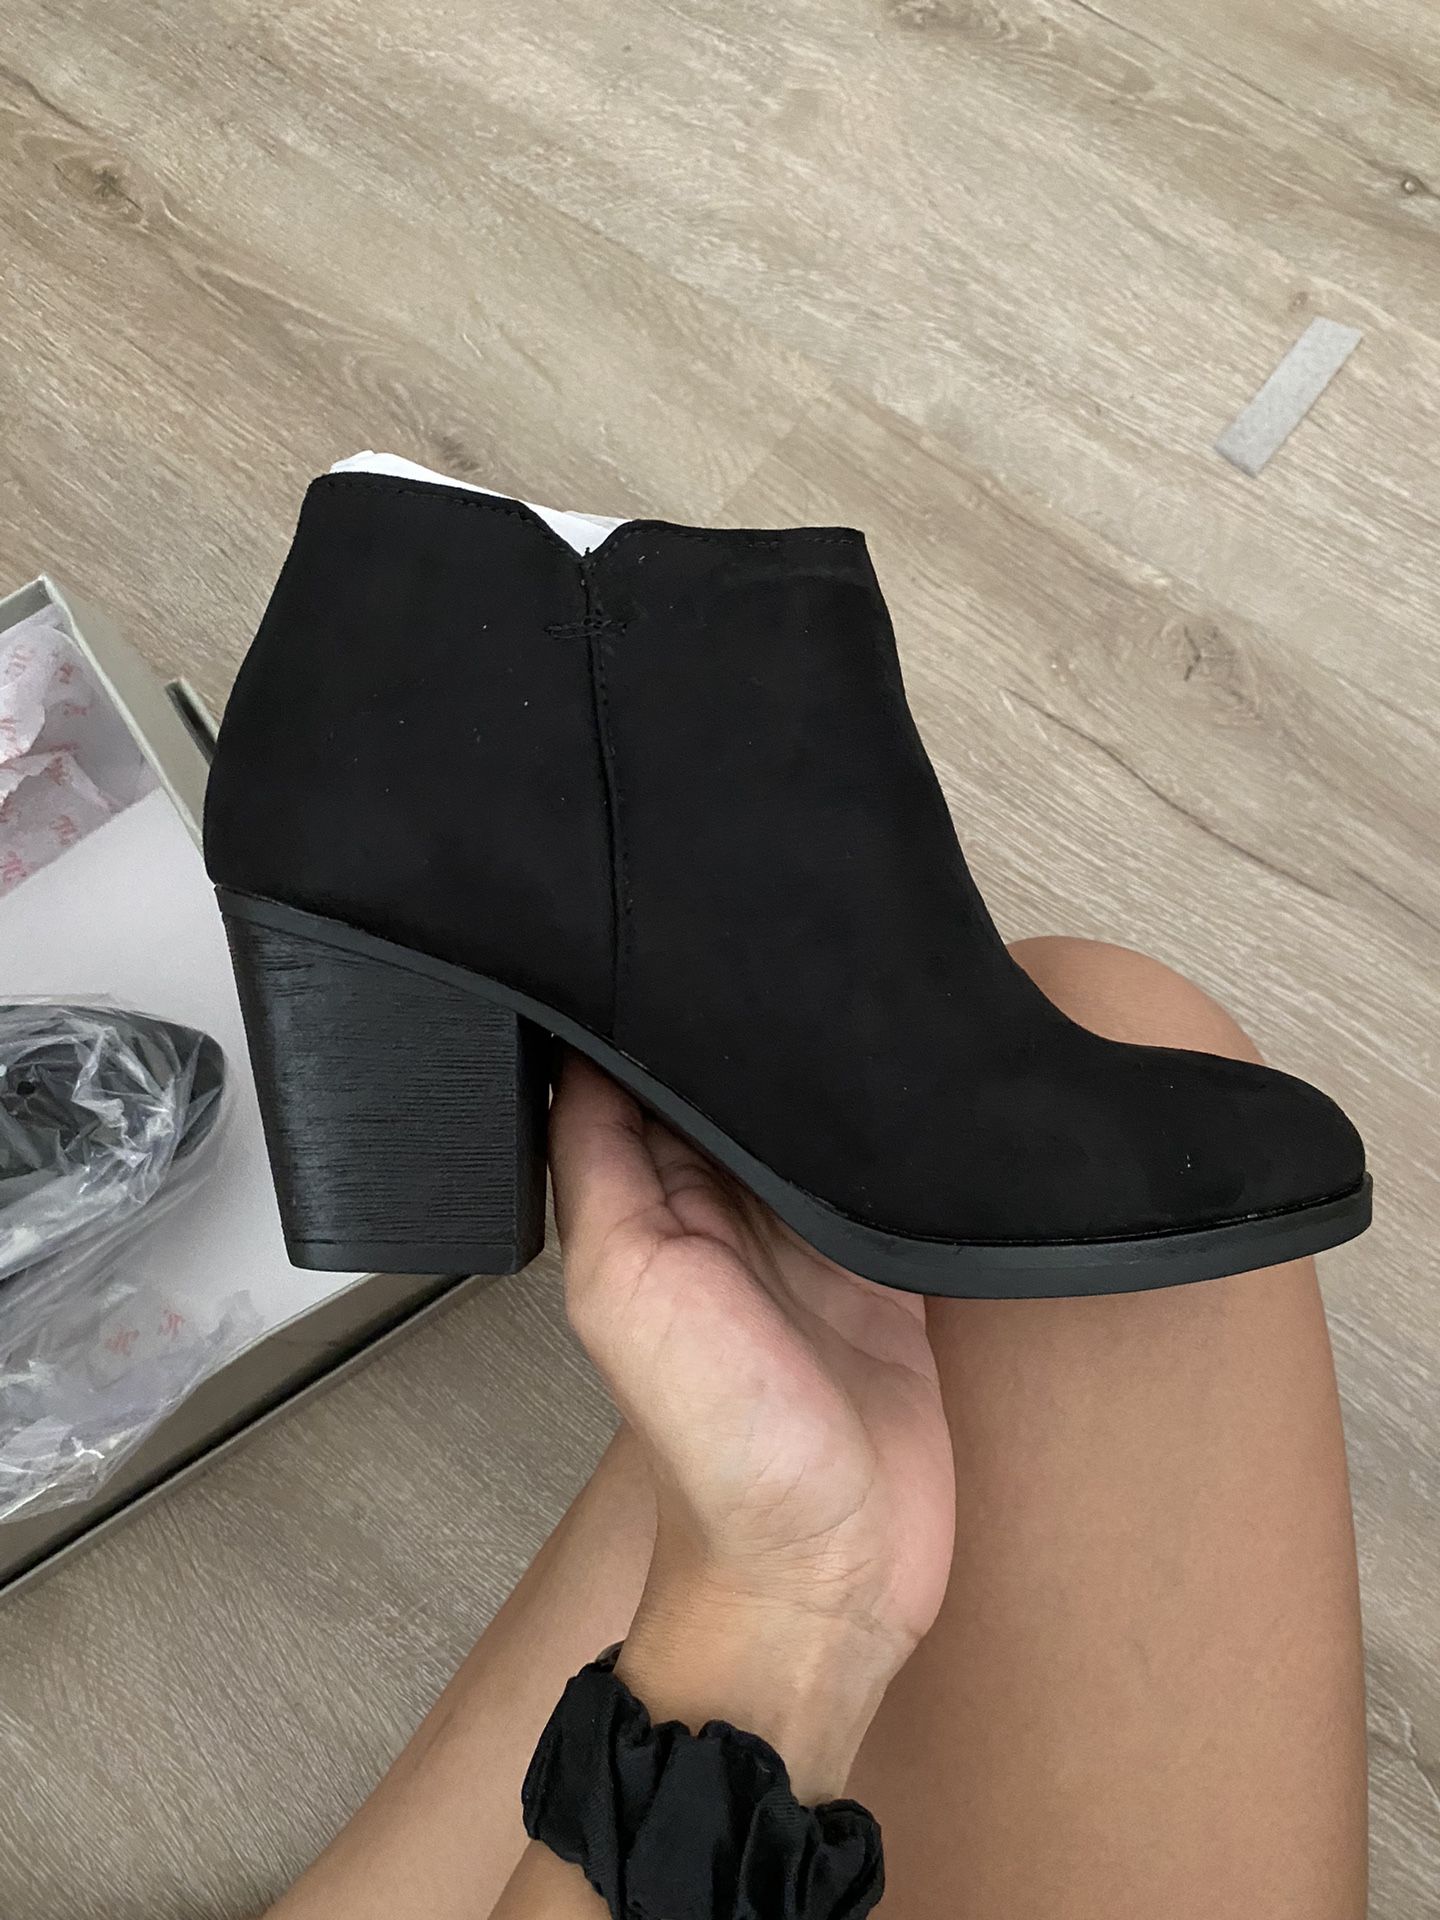 New In Box Black Booties / Ankle Boots Size 6